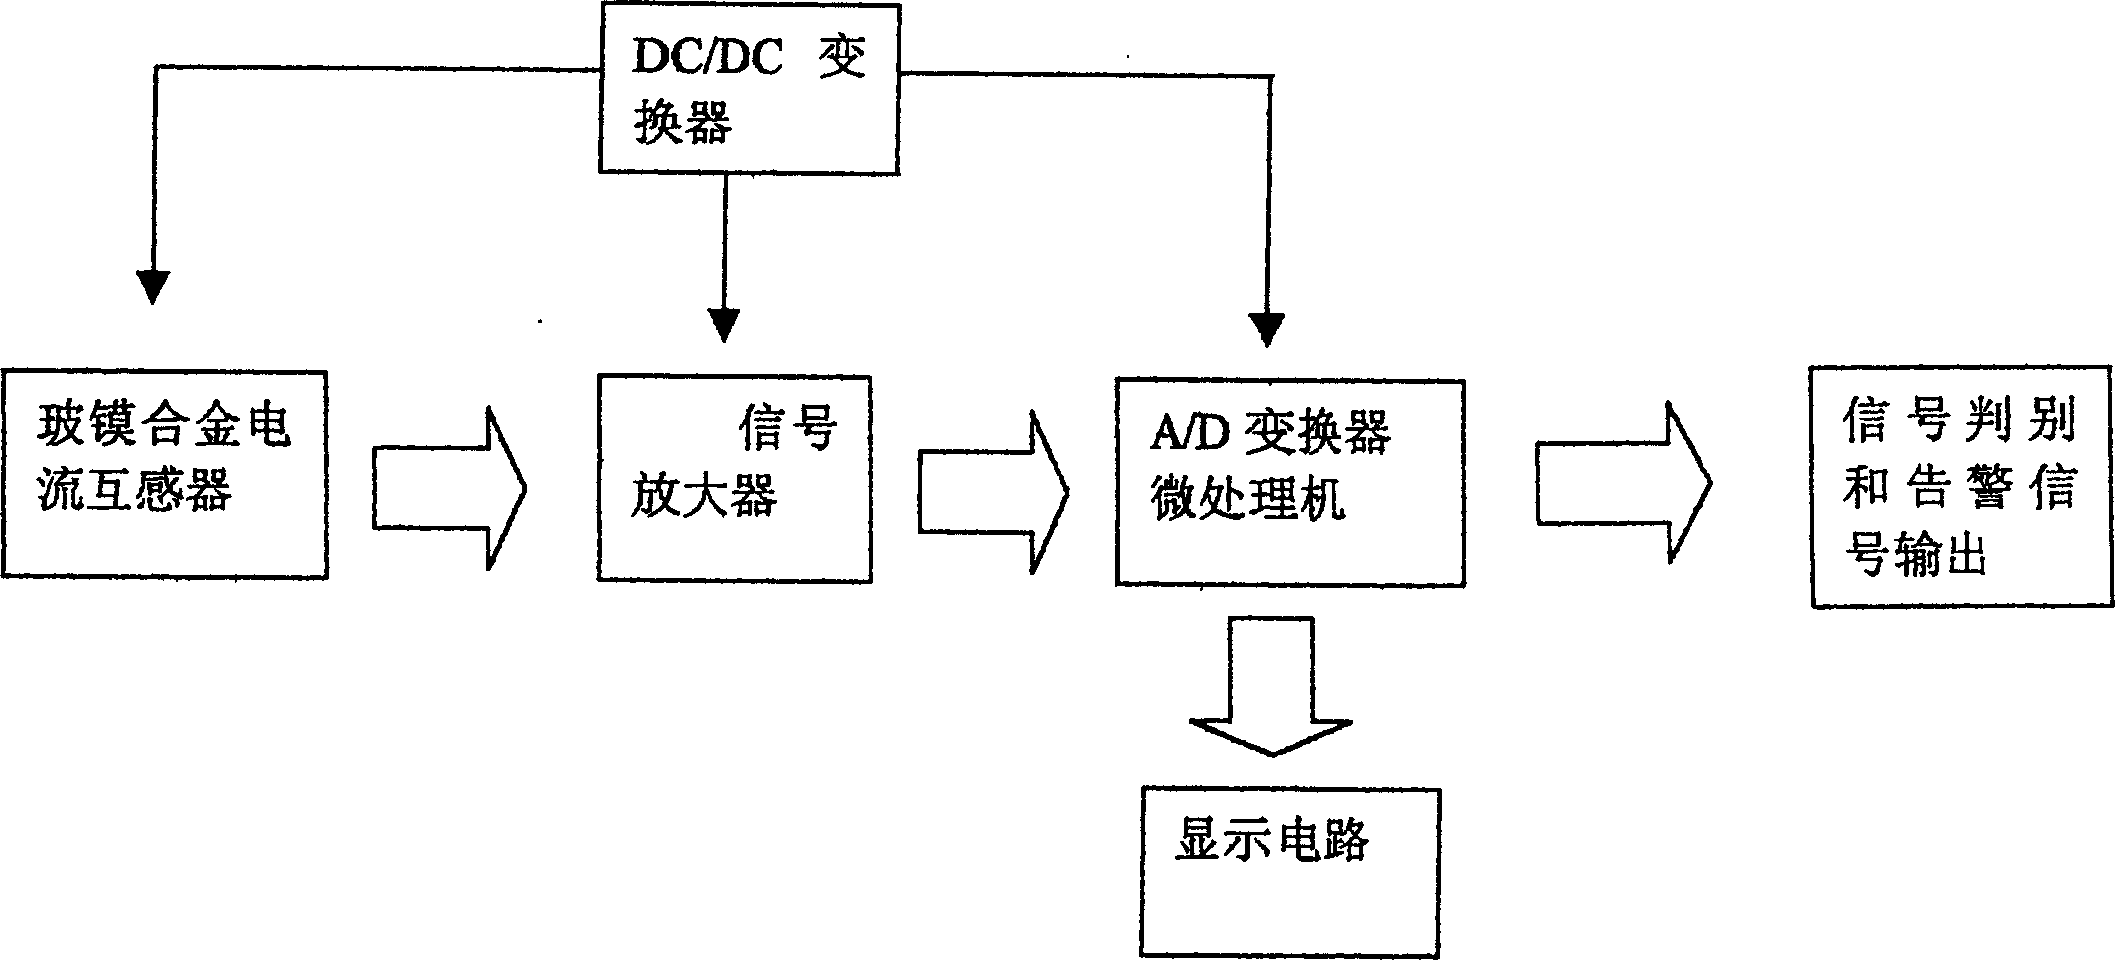 Industrial frequency invasion detecting method and device for outside connections of main distribution frame